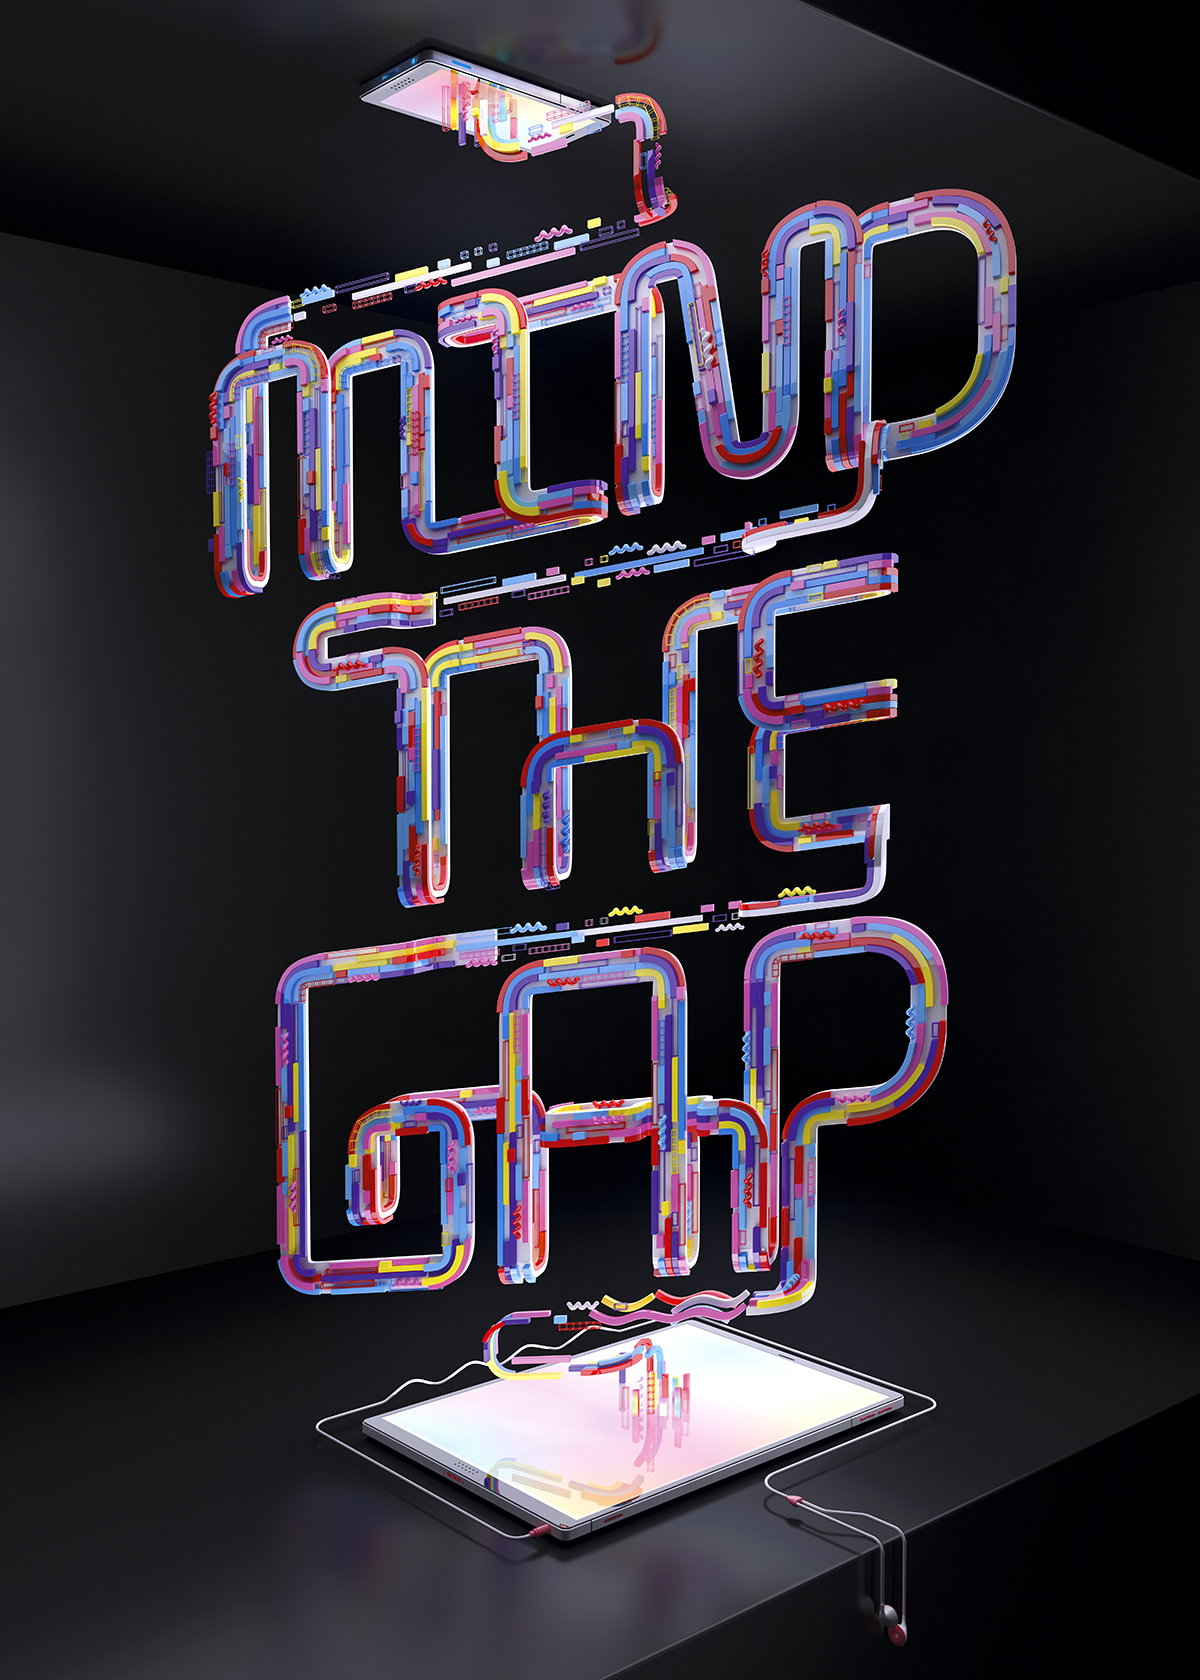 Typography projects on Behance